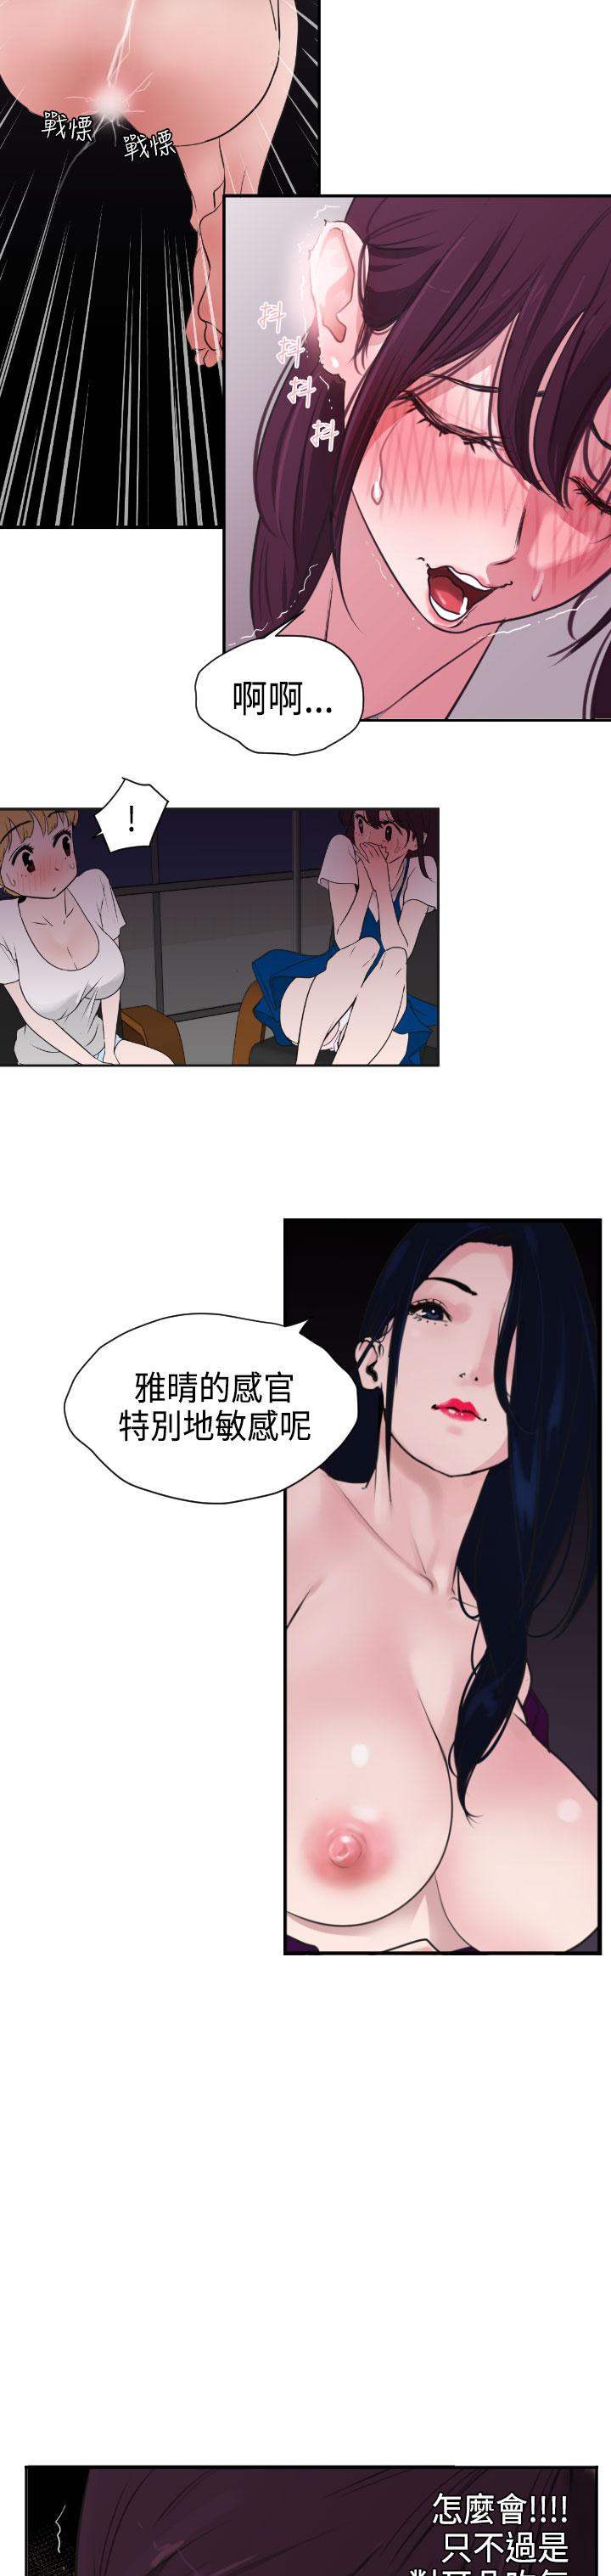 Desire King (慾求王) Ch.1-7 (chinese) 99